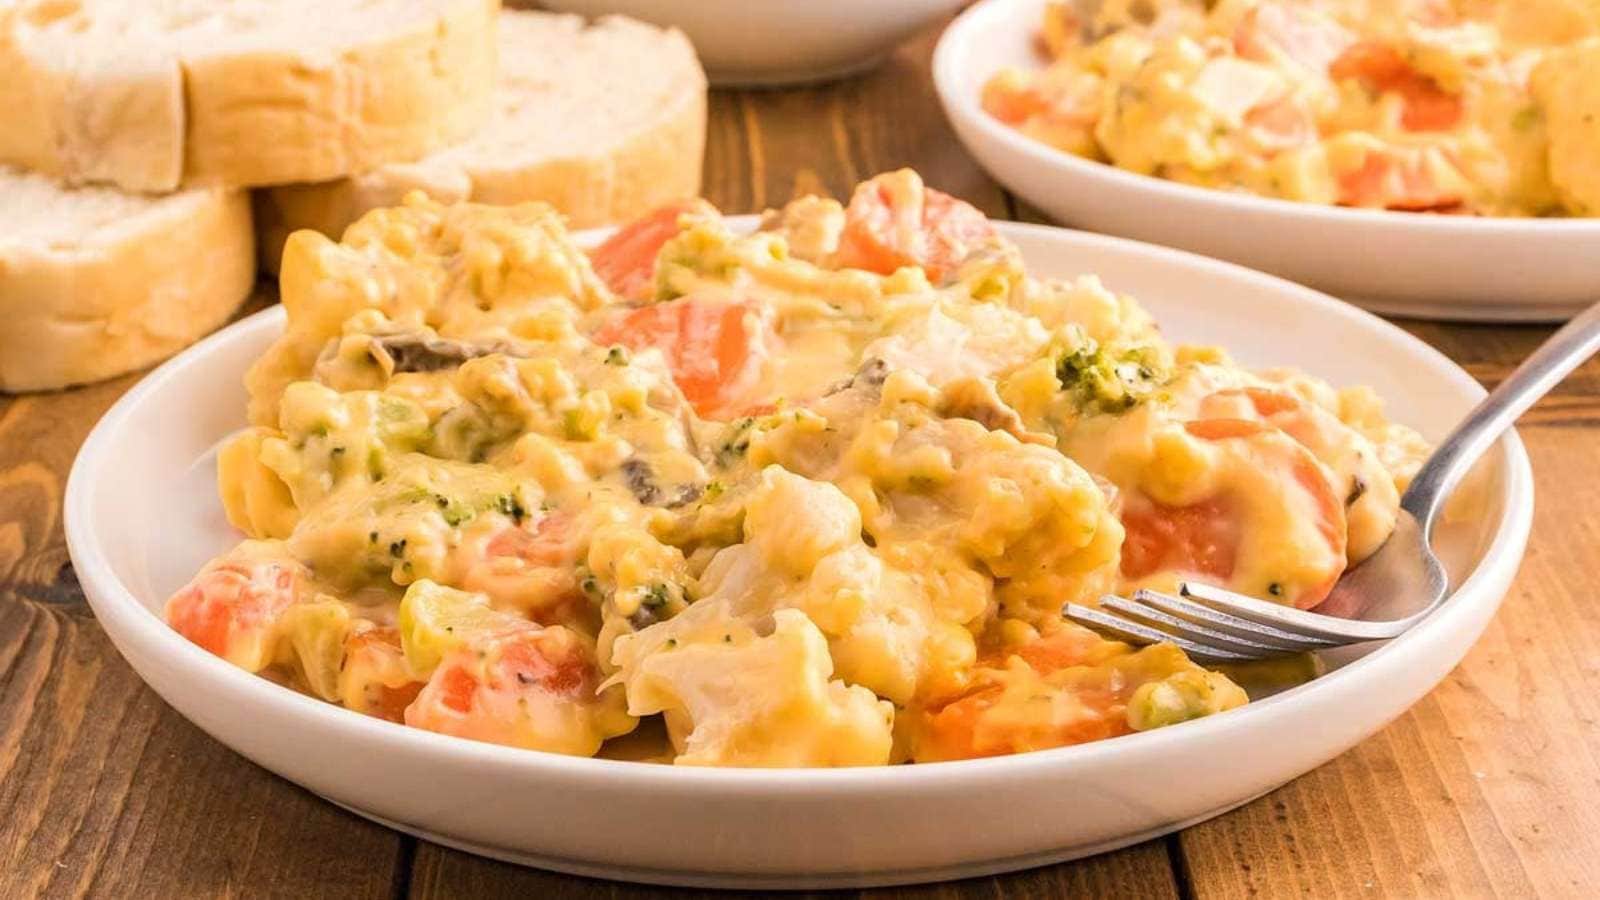 <p>This cheesy vegetable bake is a delicious vegetable medley that takes mere minutes to throw together. It’s a foolproof dish prepared with frozen mixed vegetables, cream of mushroom soup, butter, cheese, and crispy bread crumbs. </p><p><strong>Get the Recipe: <a href="https://xoxobella.com/cheesy-vegetable-casserole/" rel="noreferrer noopener">Cheesy Vegetable Casserole</a></strong></p>